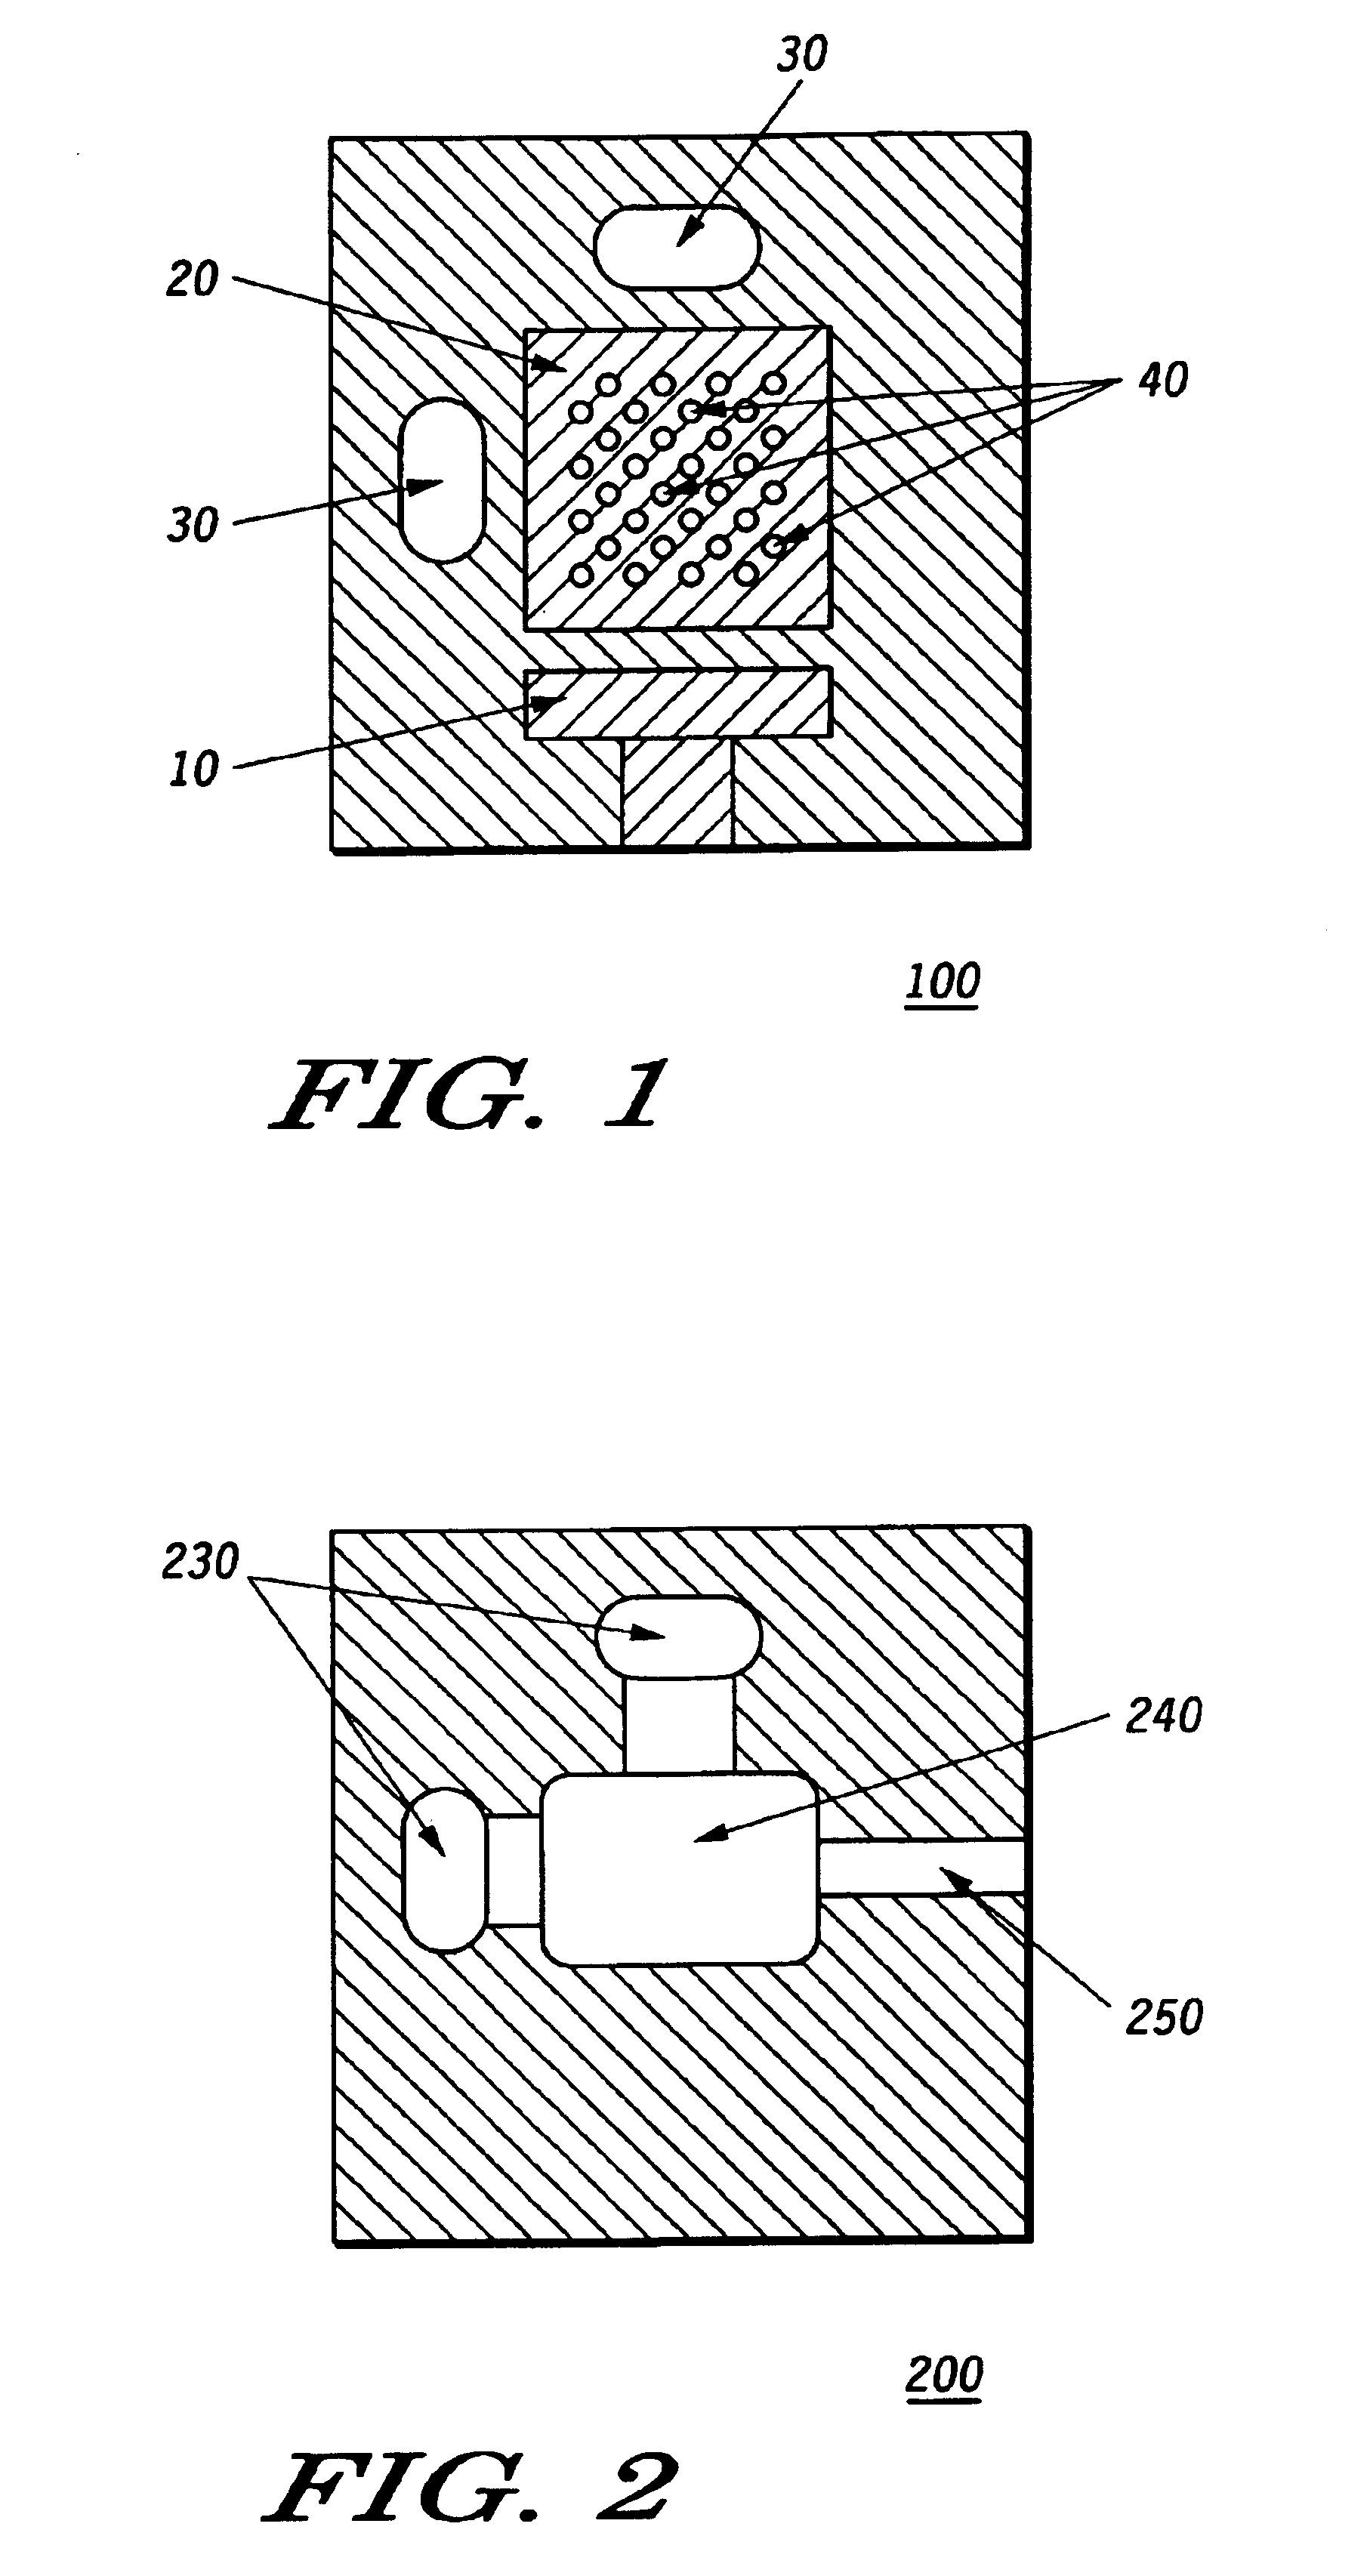 Electrical circuit apparatus and methods for assembling same